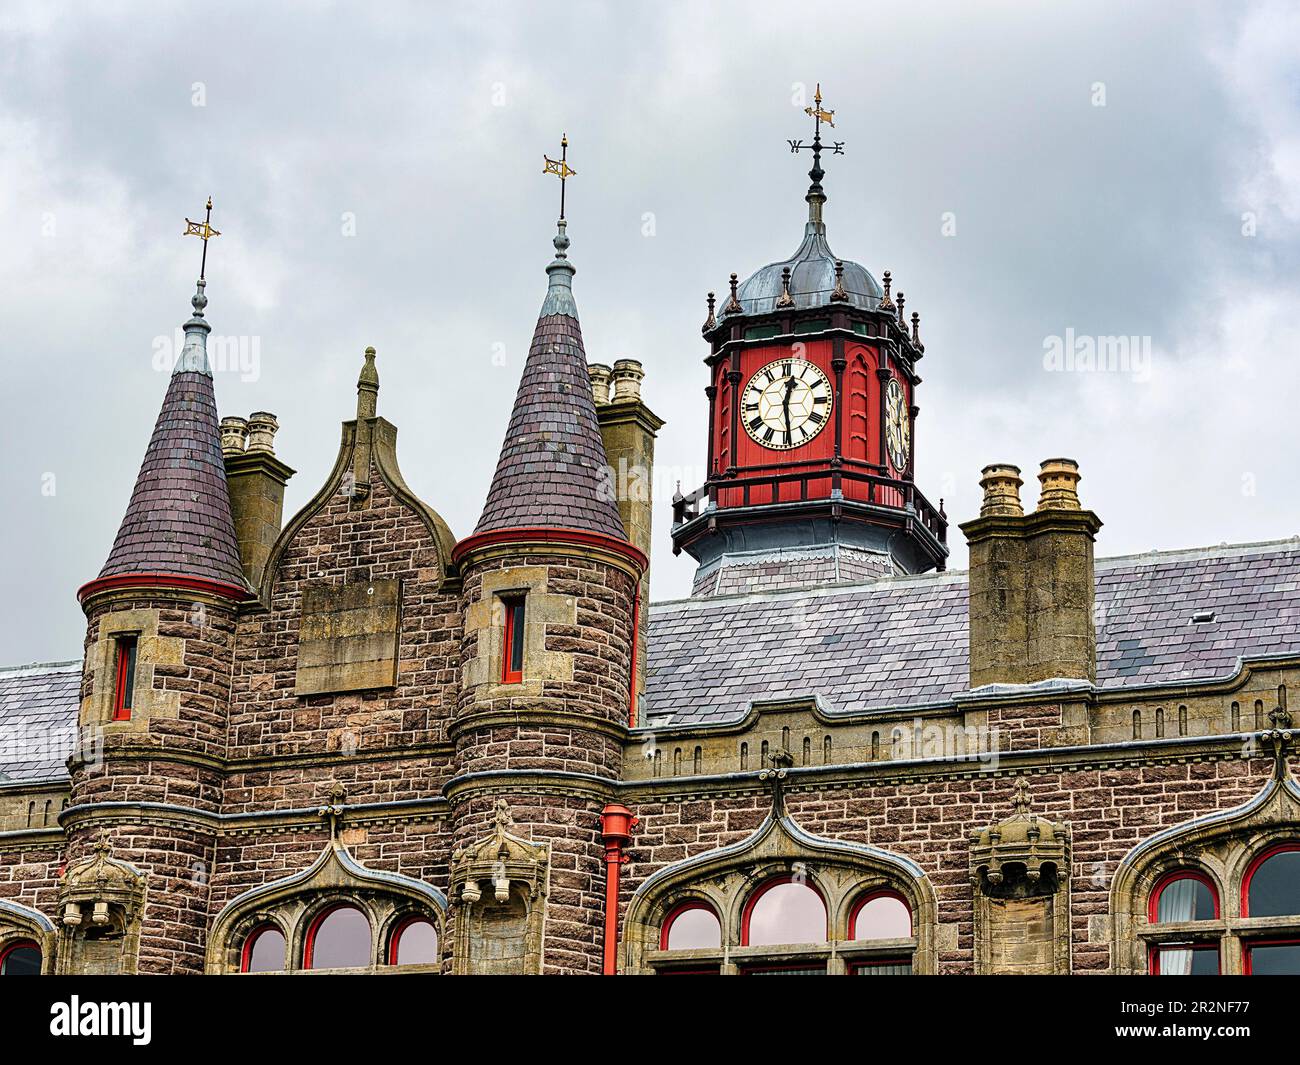 Former town hall with clock tower, detail, Stornoway, Isle of Lewis and Harris, Scotland, Great Britain Stock Photo